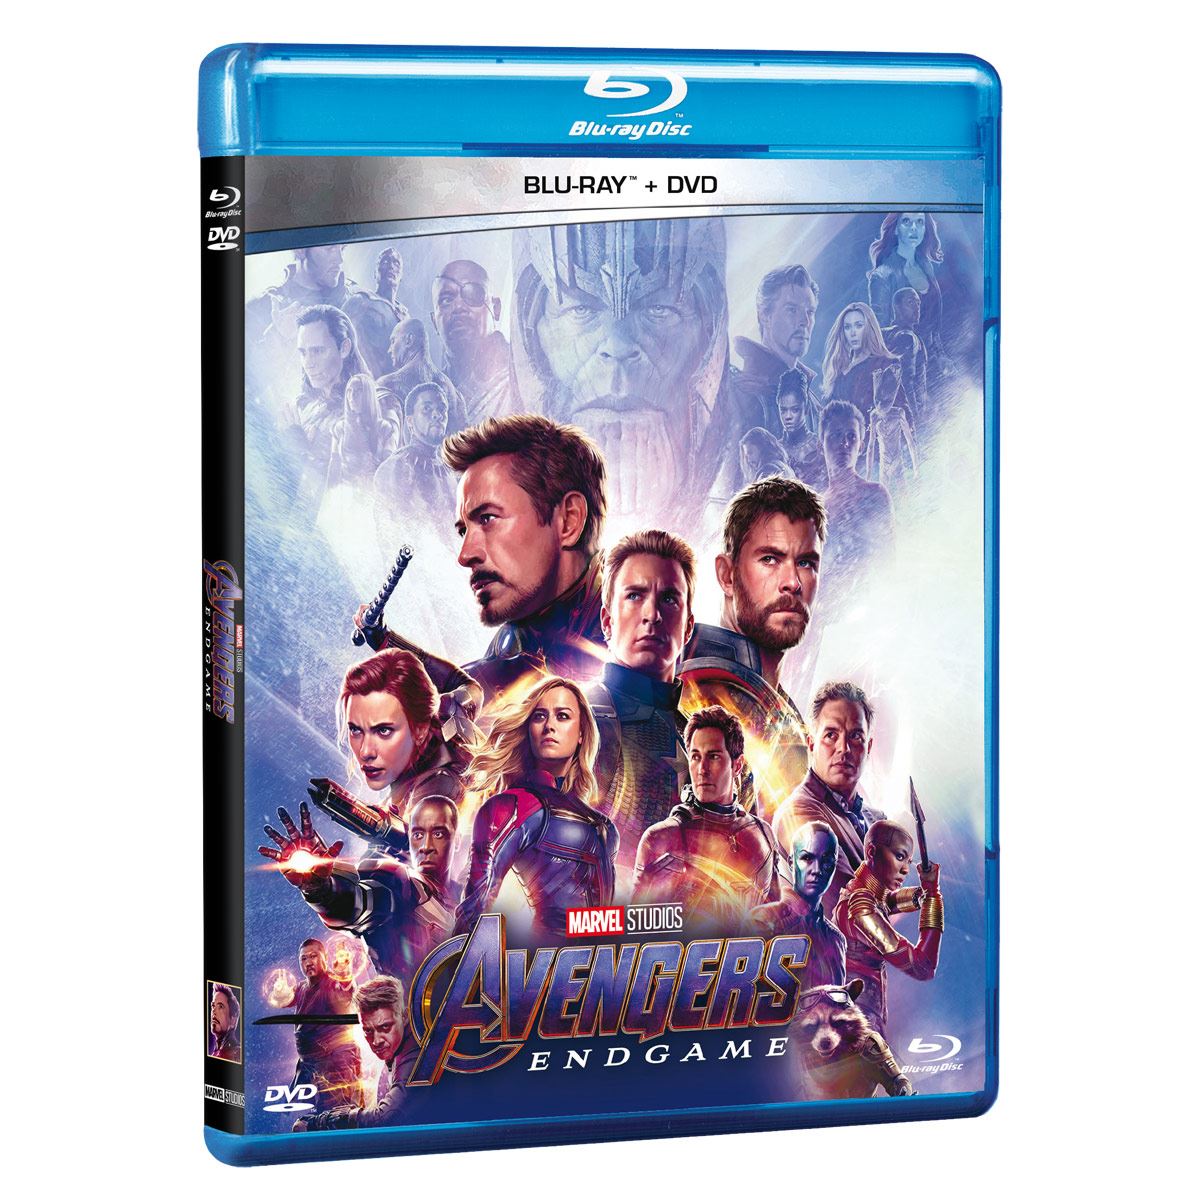 Blu-Ray + DVD - Avengers End Game